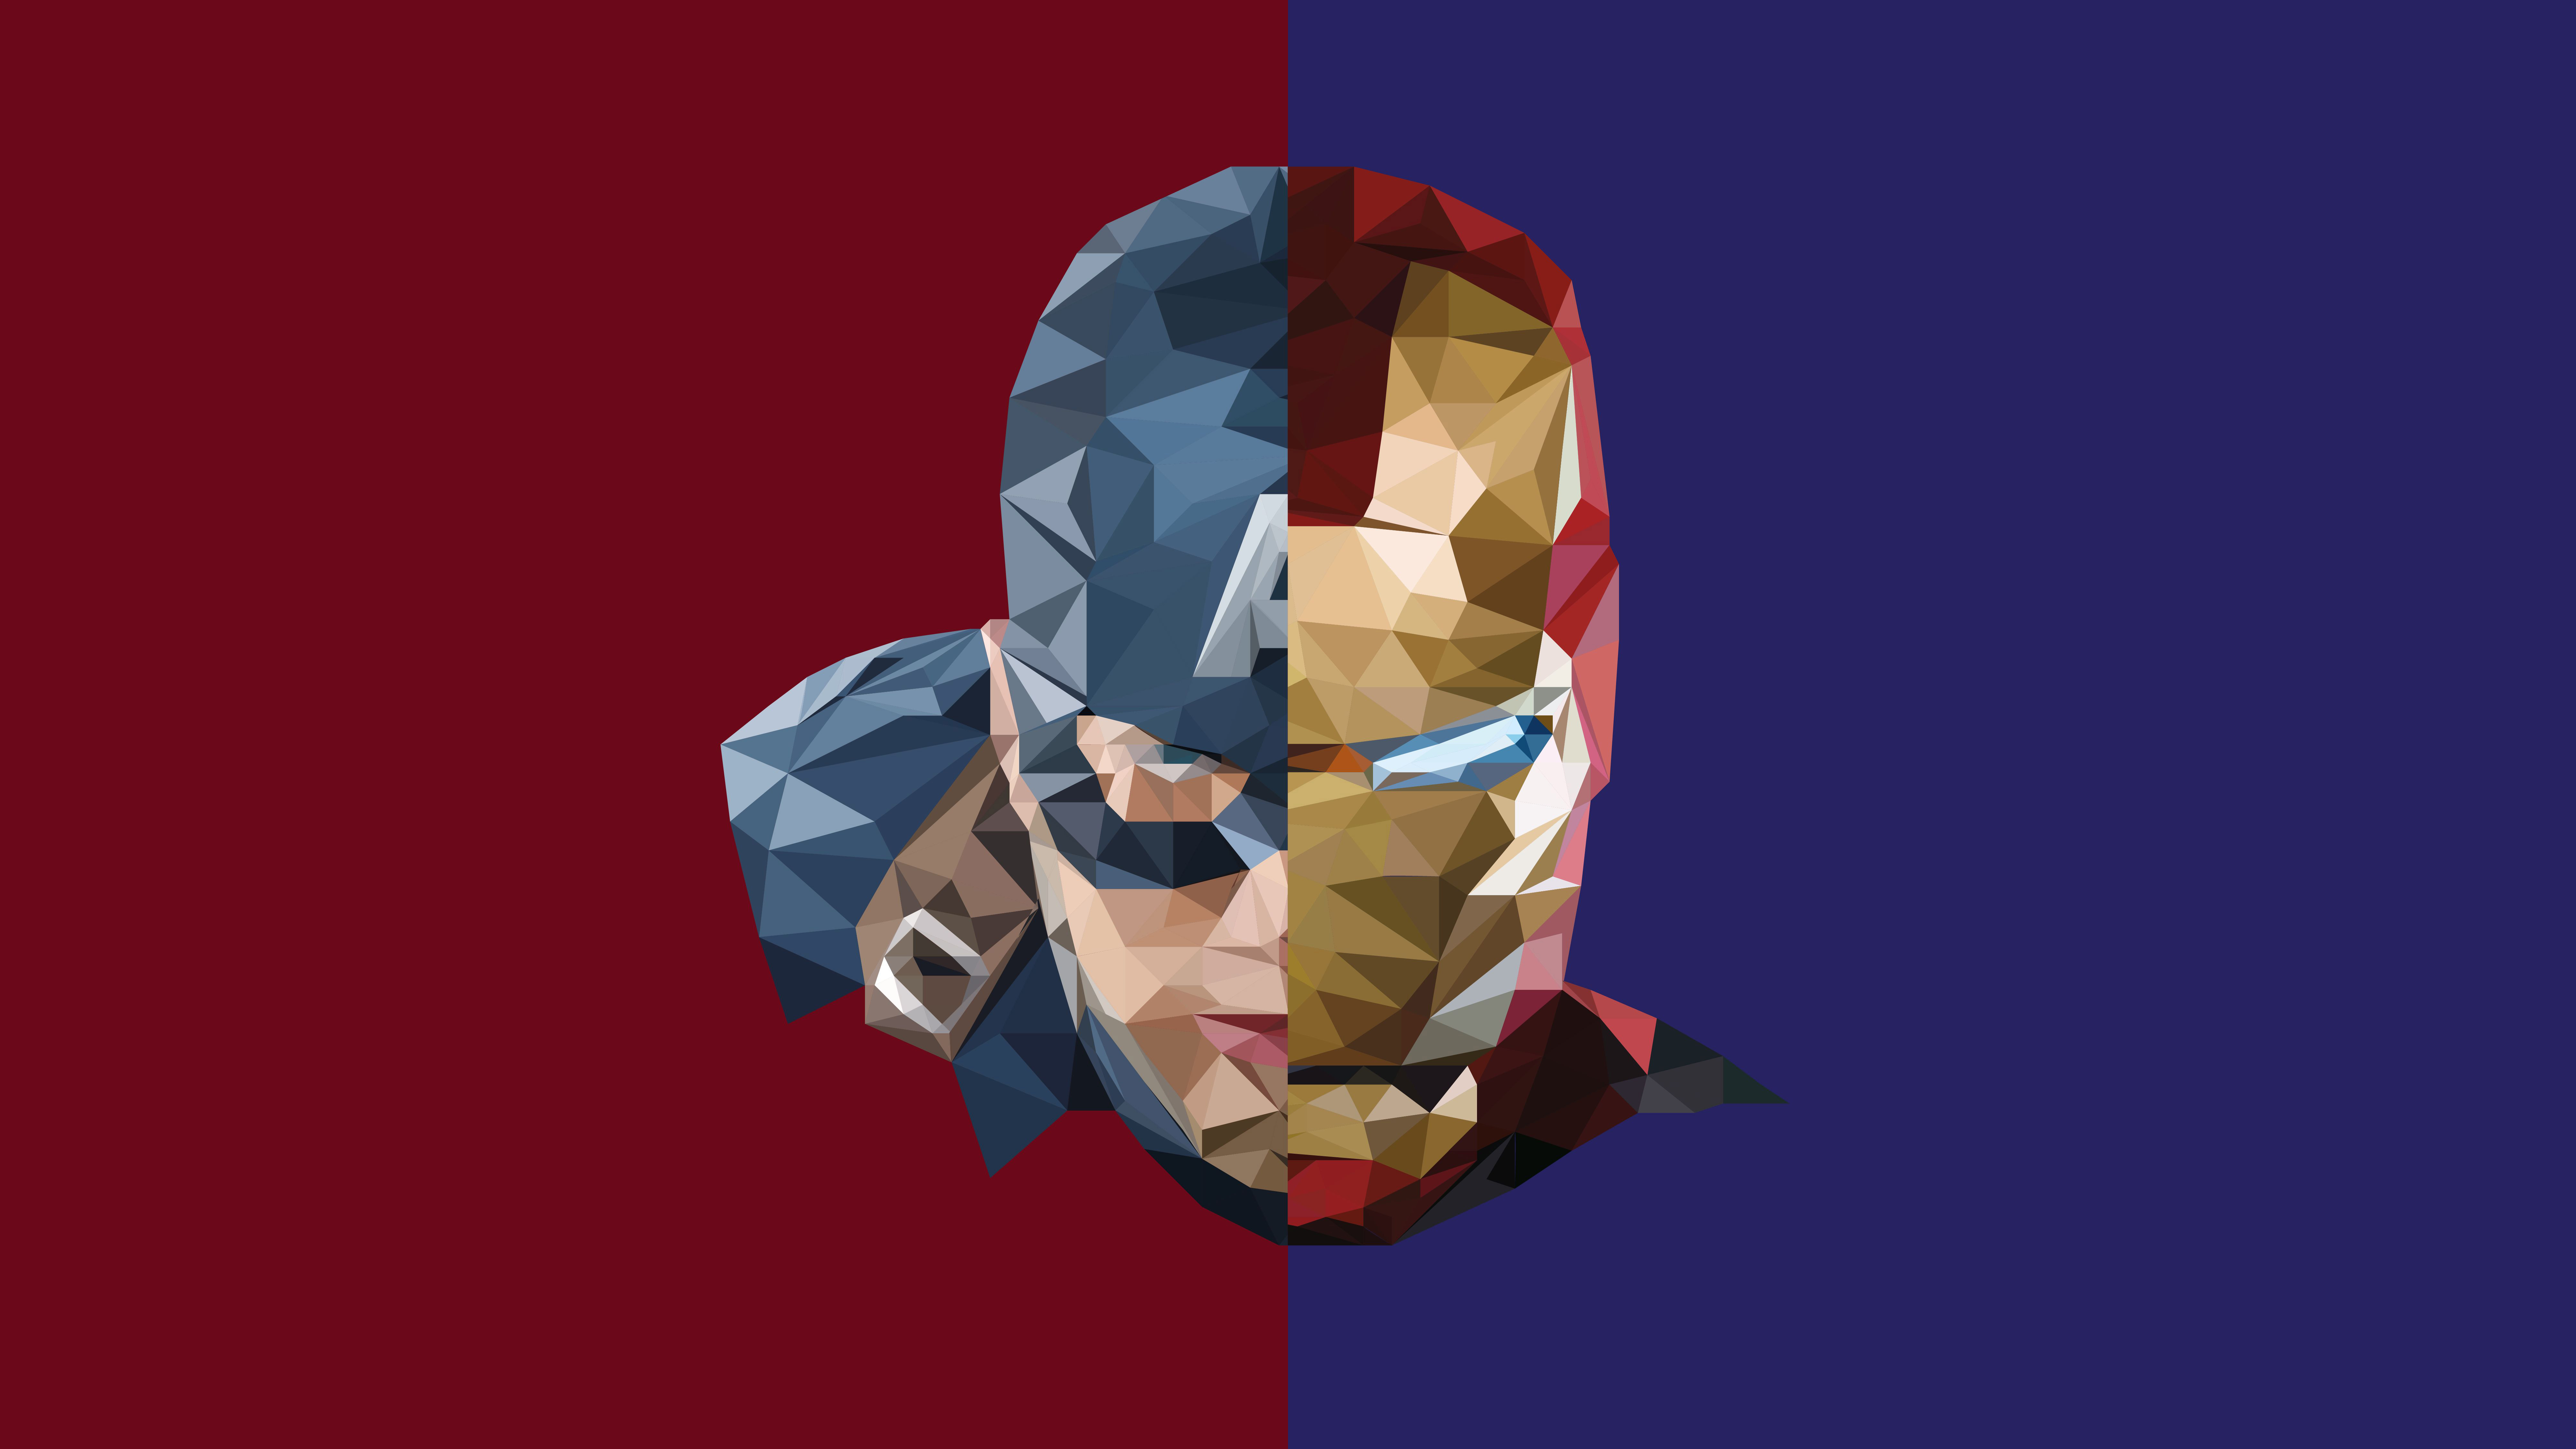 Iron Man Captain America Abstract, HD Superheroes, 4k Wallpapers